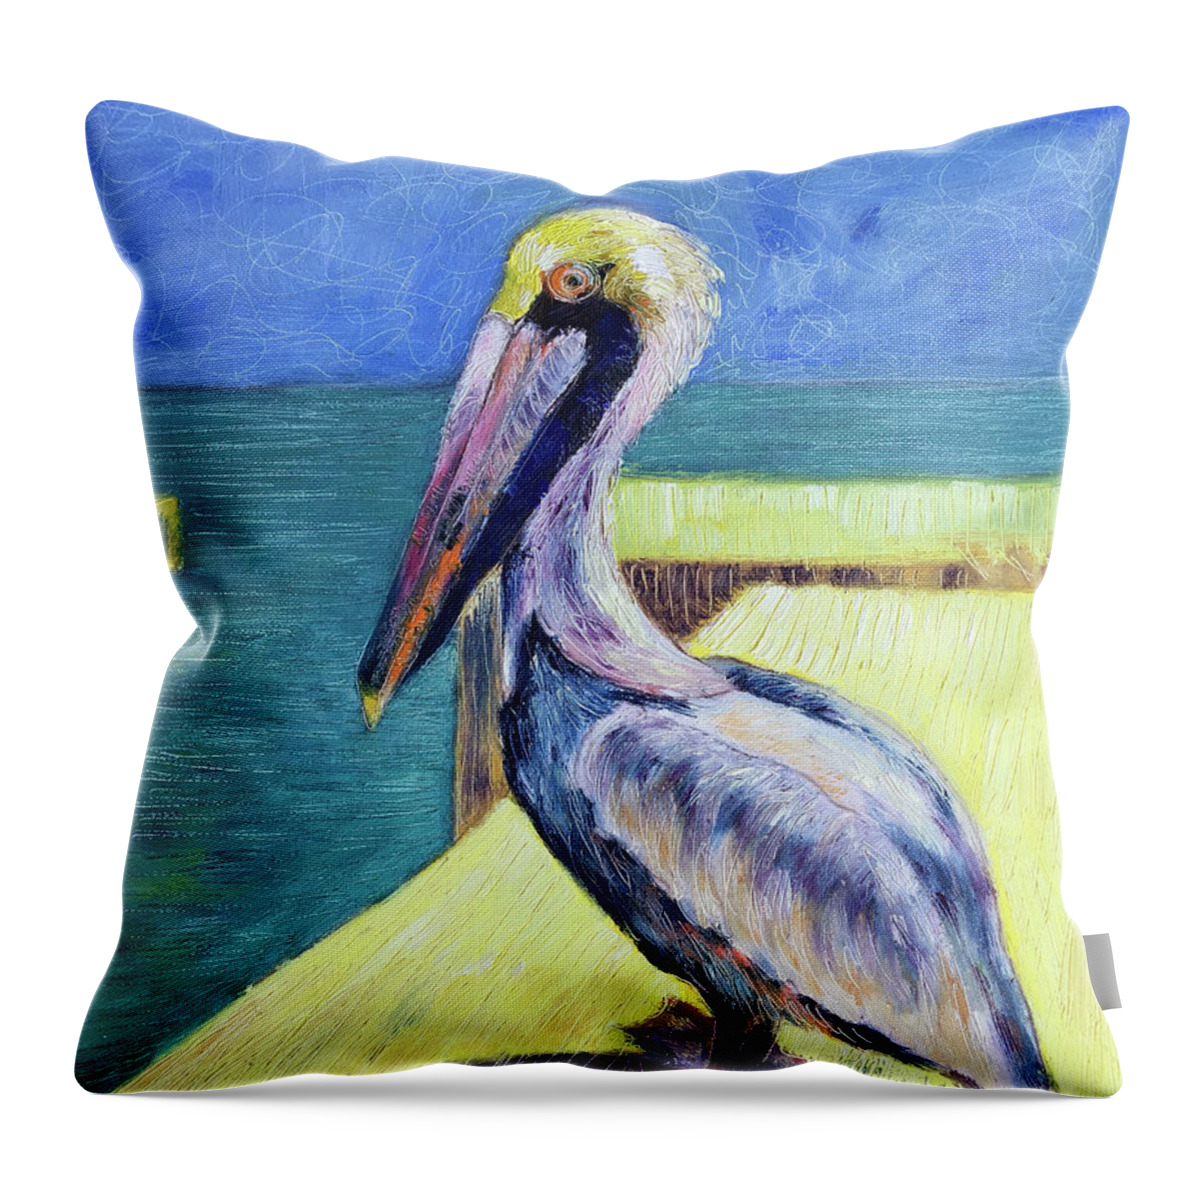 Pelican Throw Pillow featuring the painting Sunny Pelican by AnneMarie Welsh